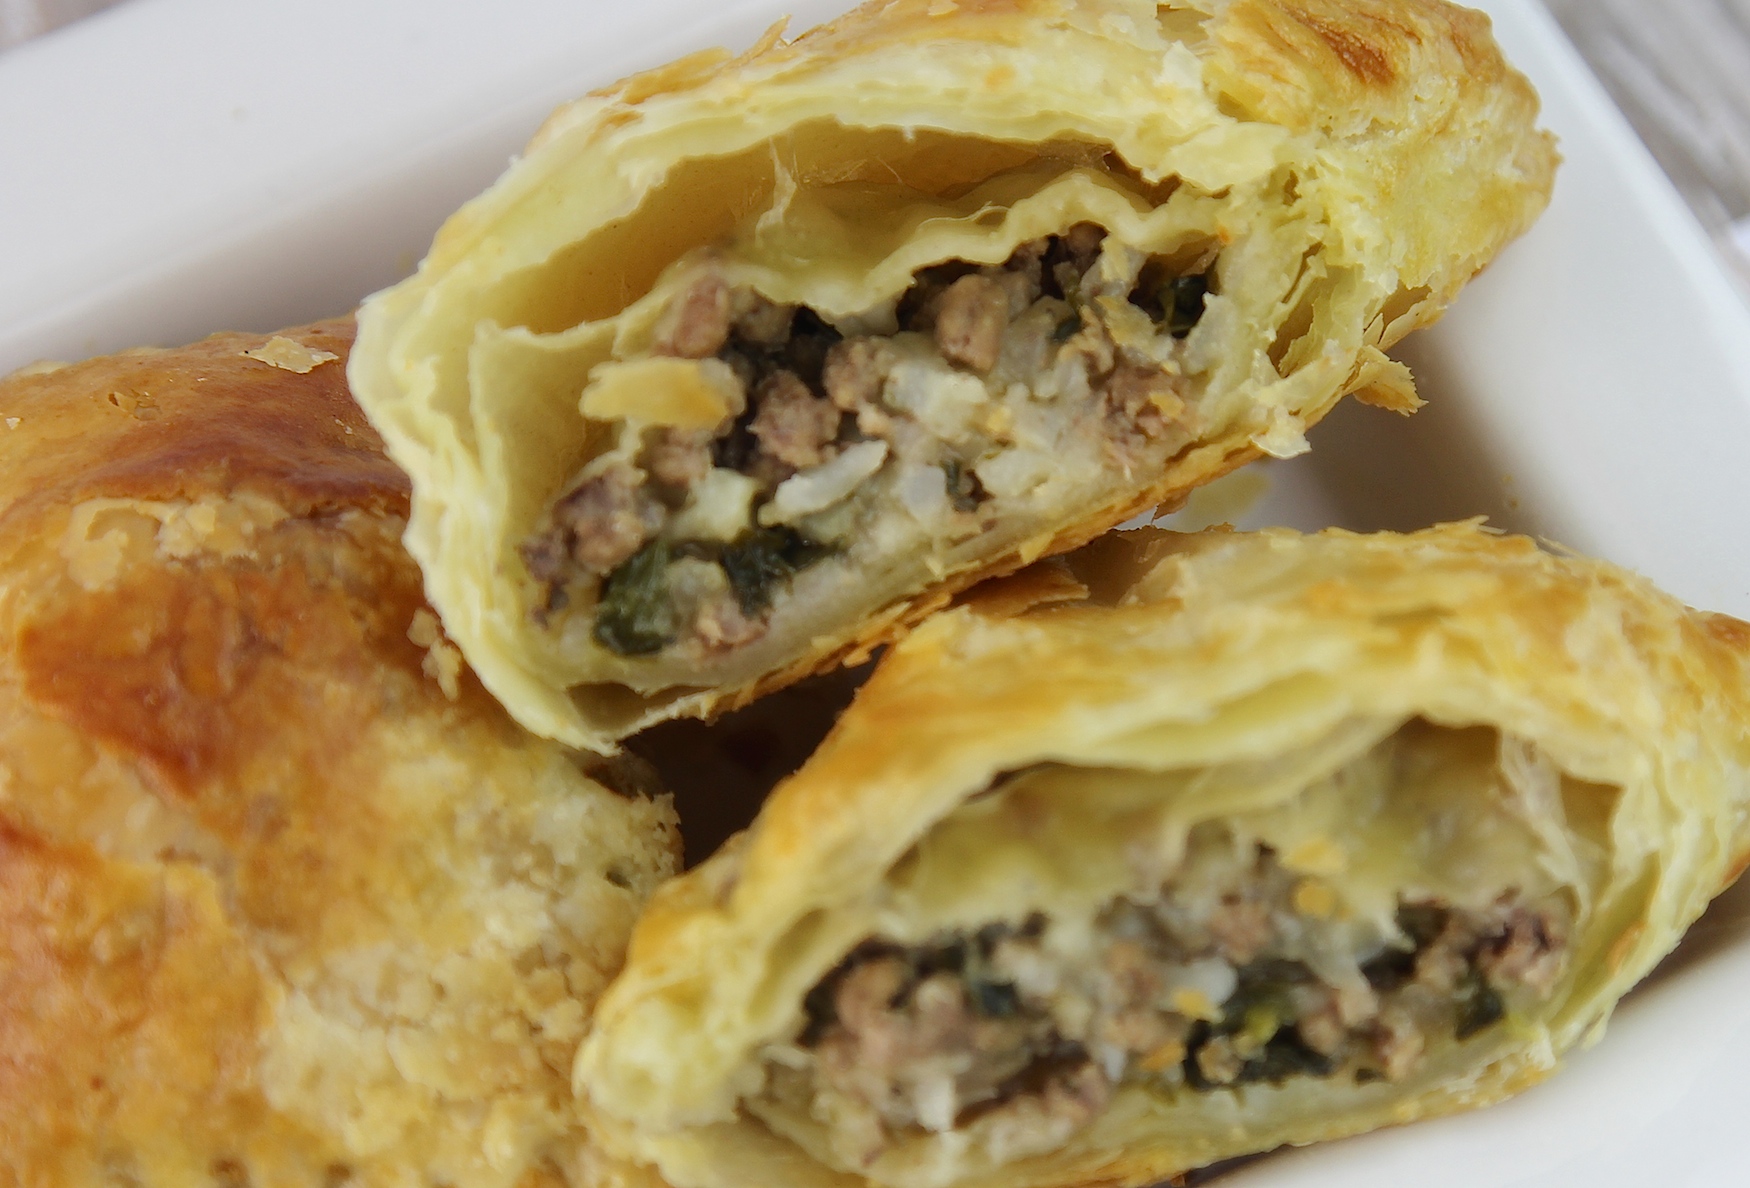 beef and rice empanada Riceland (c)nwafoodie AD #ShopRiceland